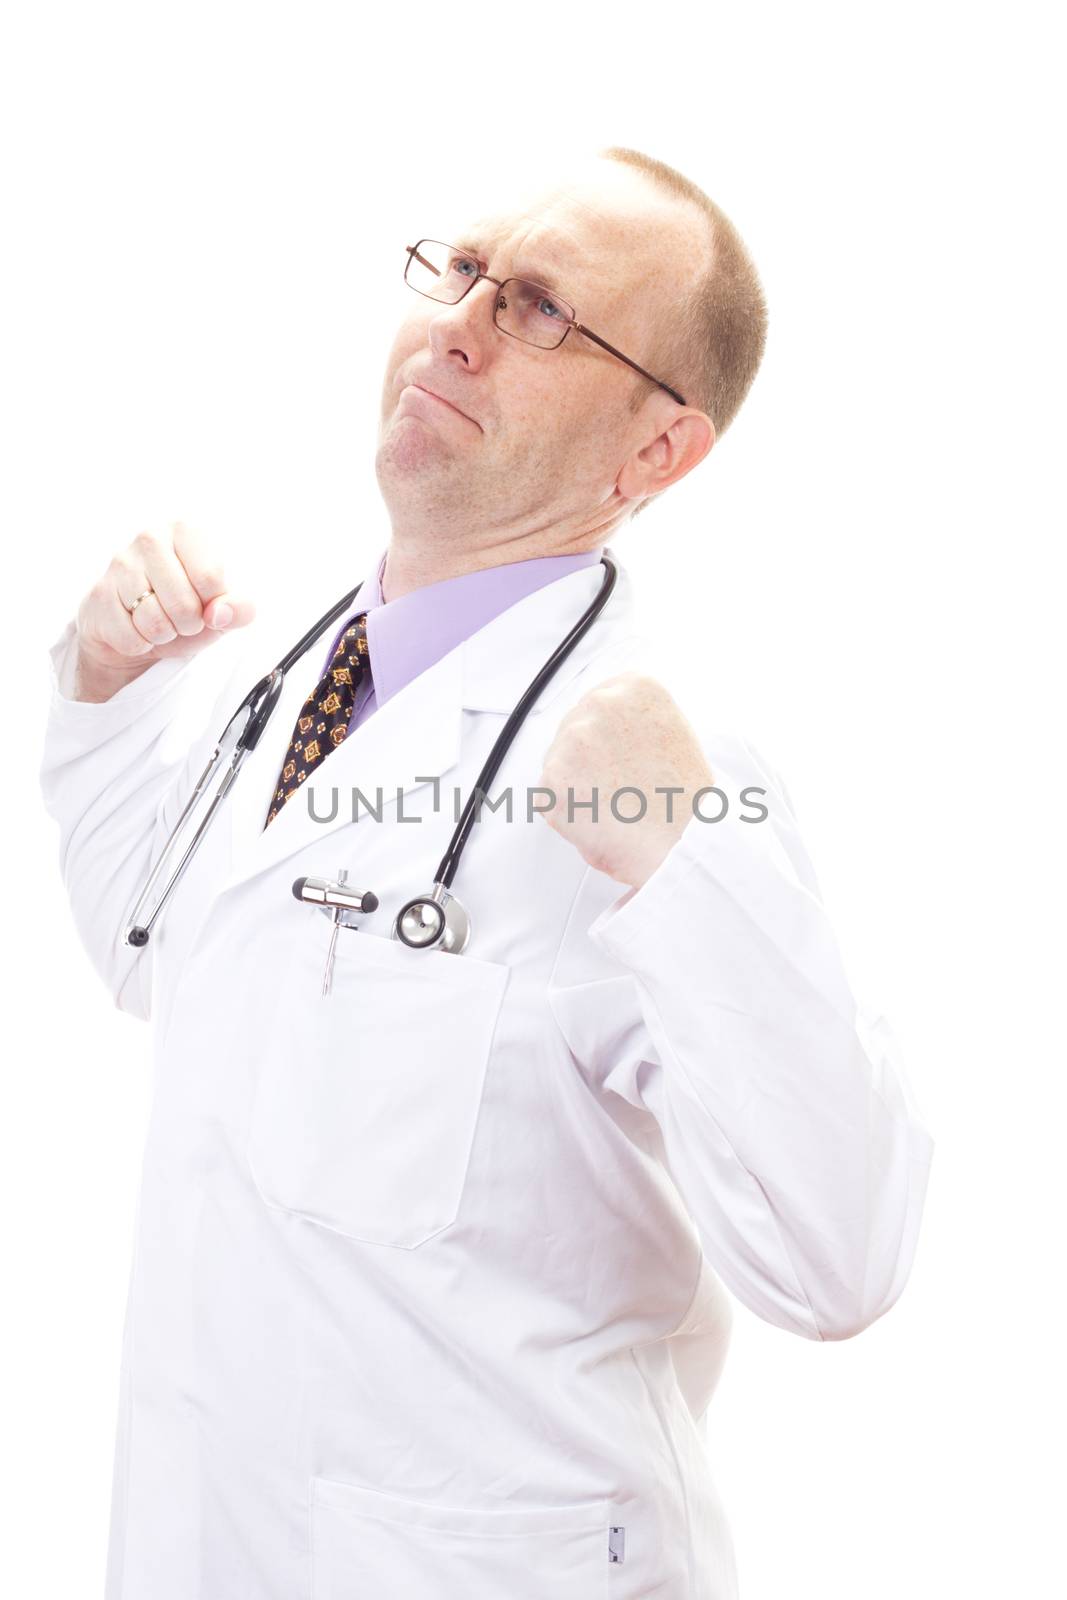 Male medical doctor stretching his back after long period of work